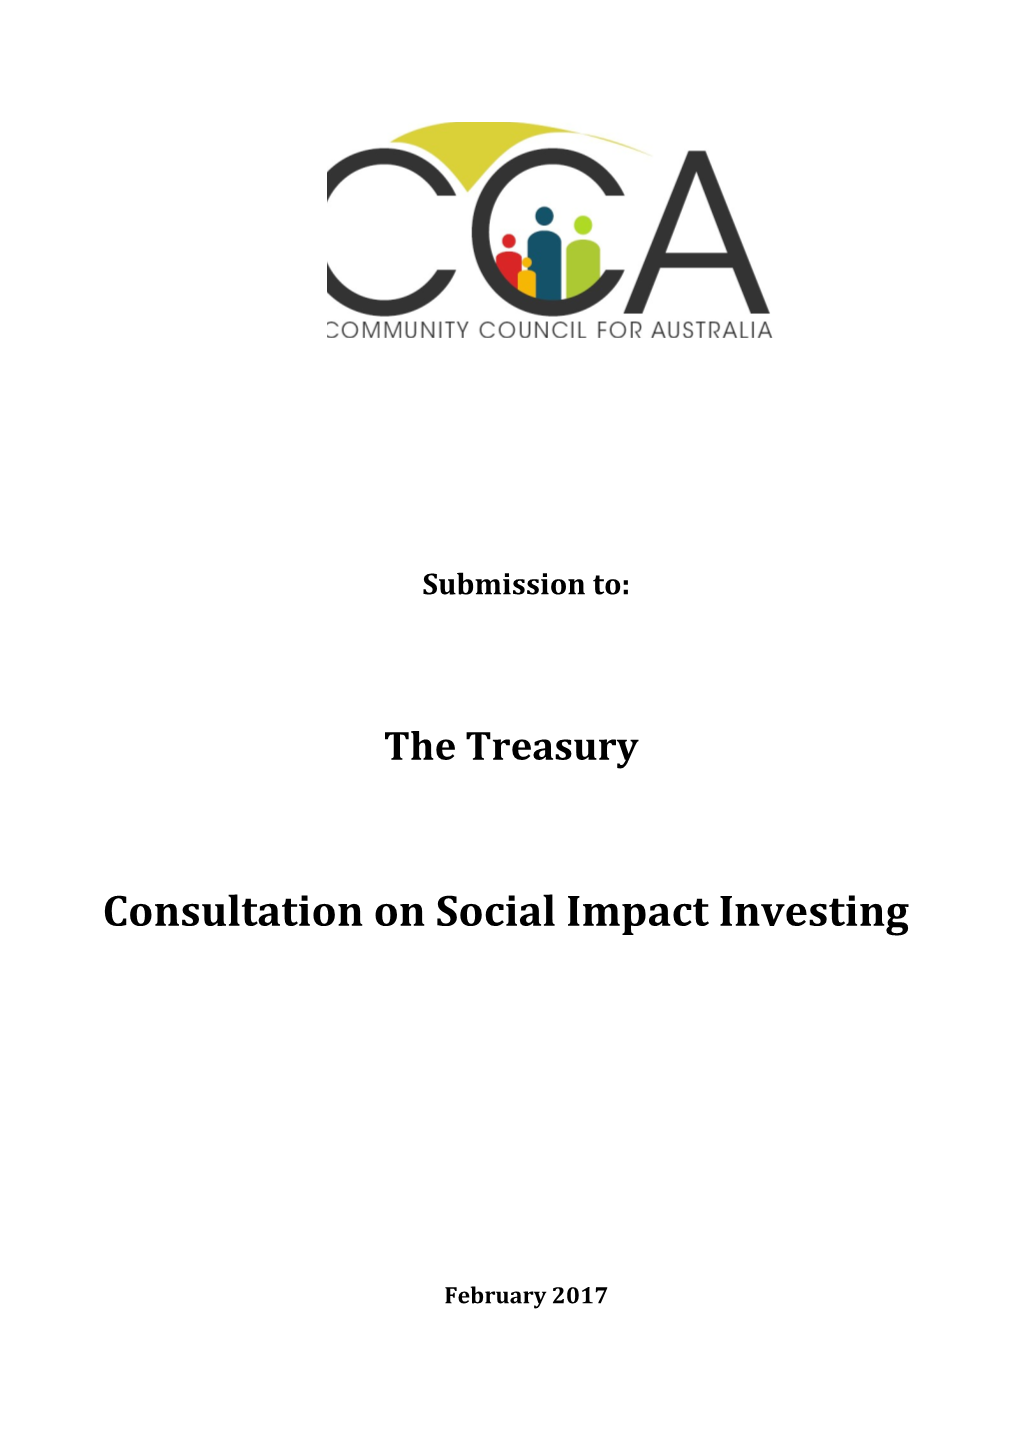 Consultation on Social Impact Investing